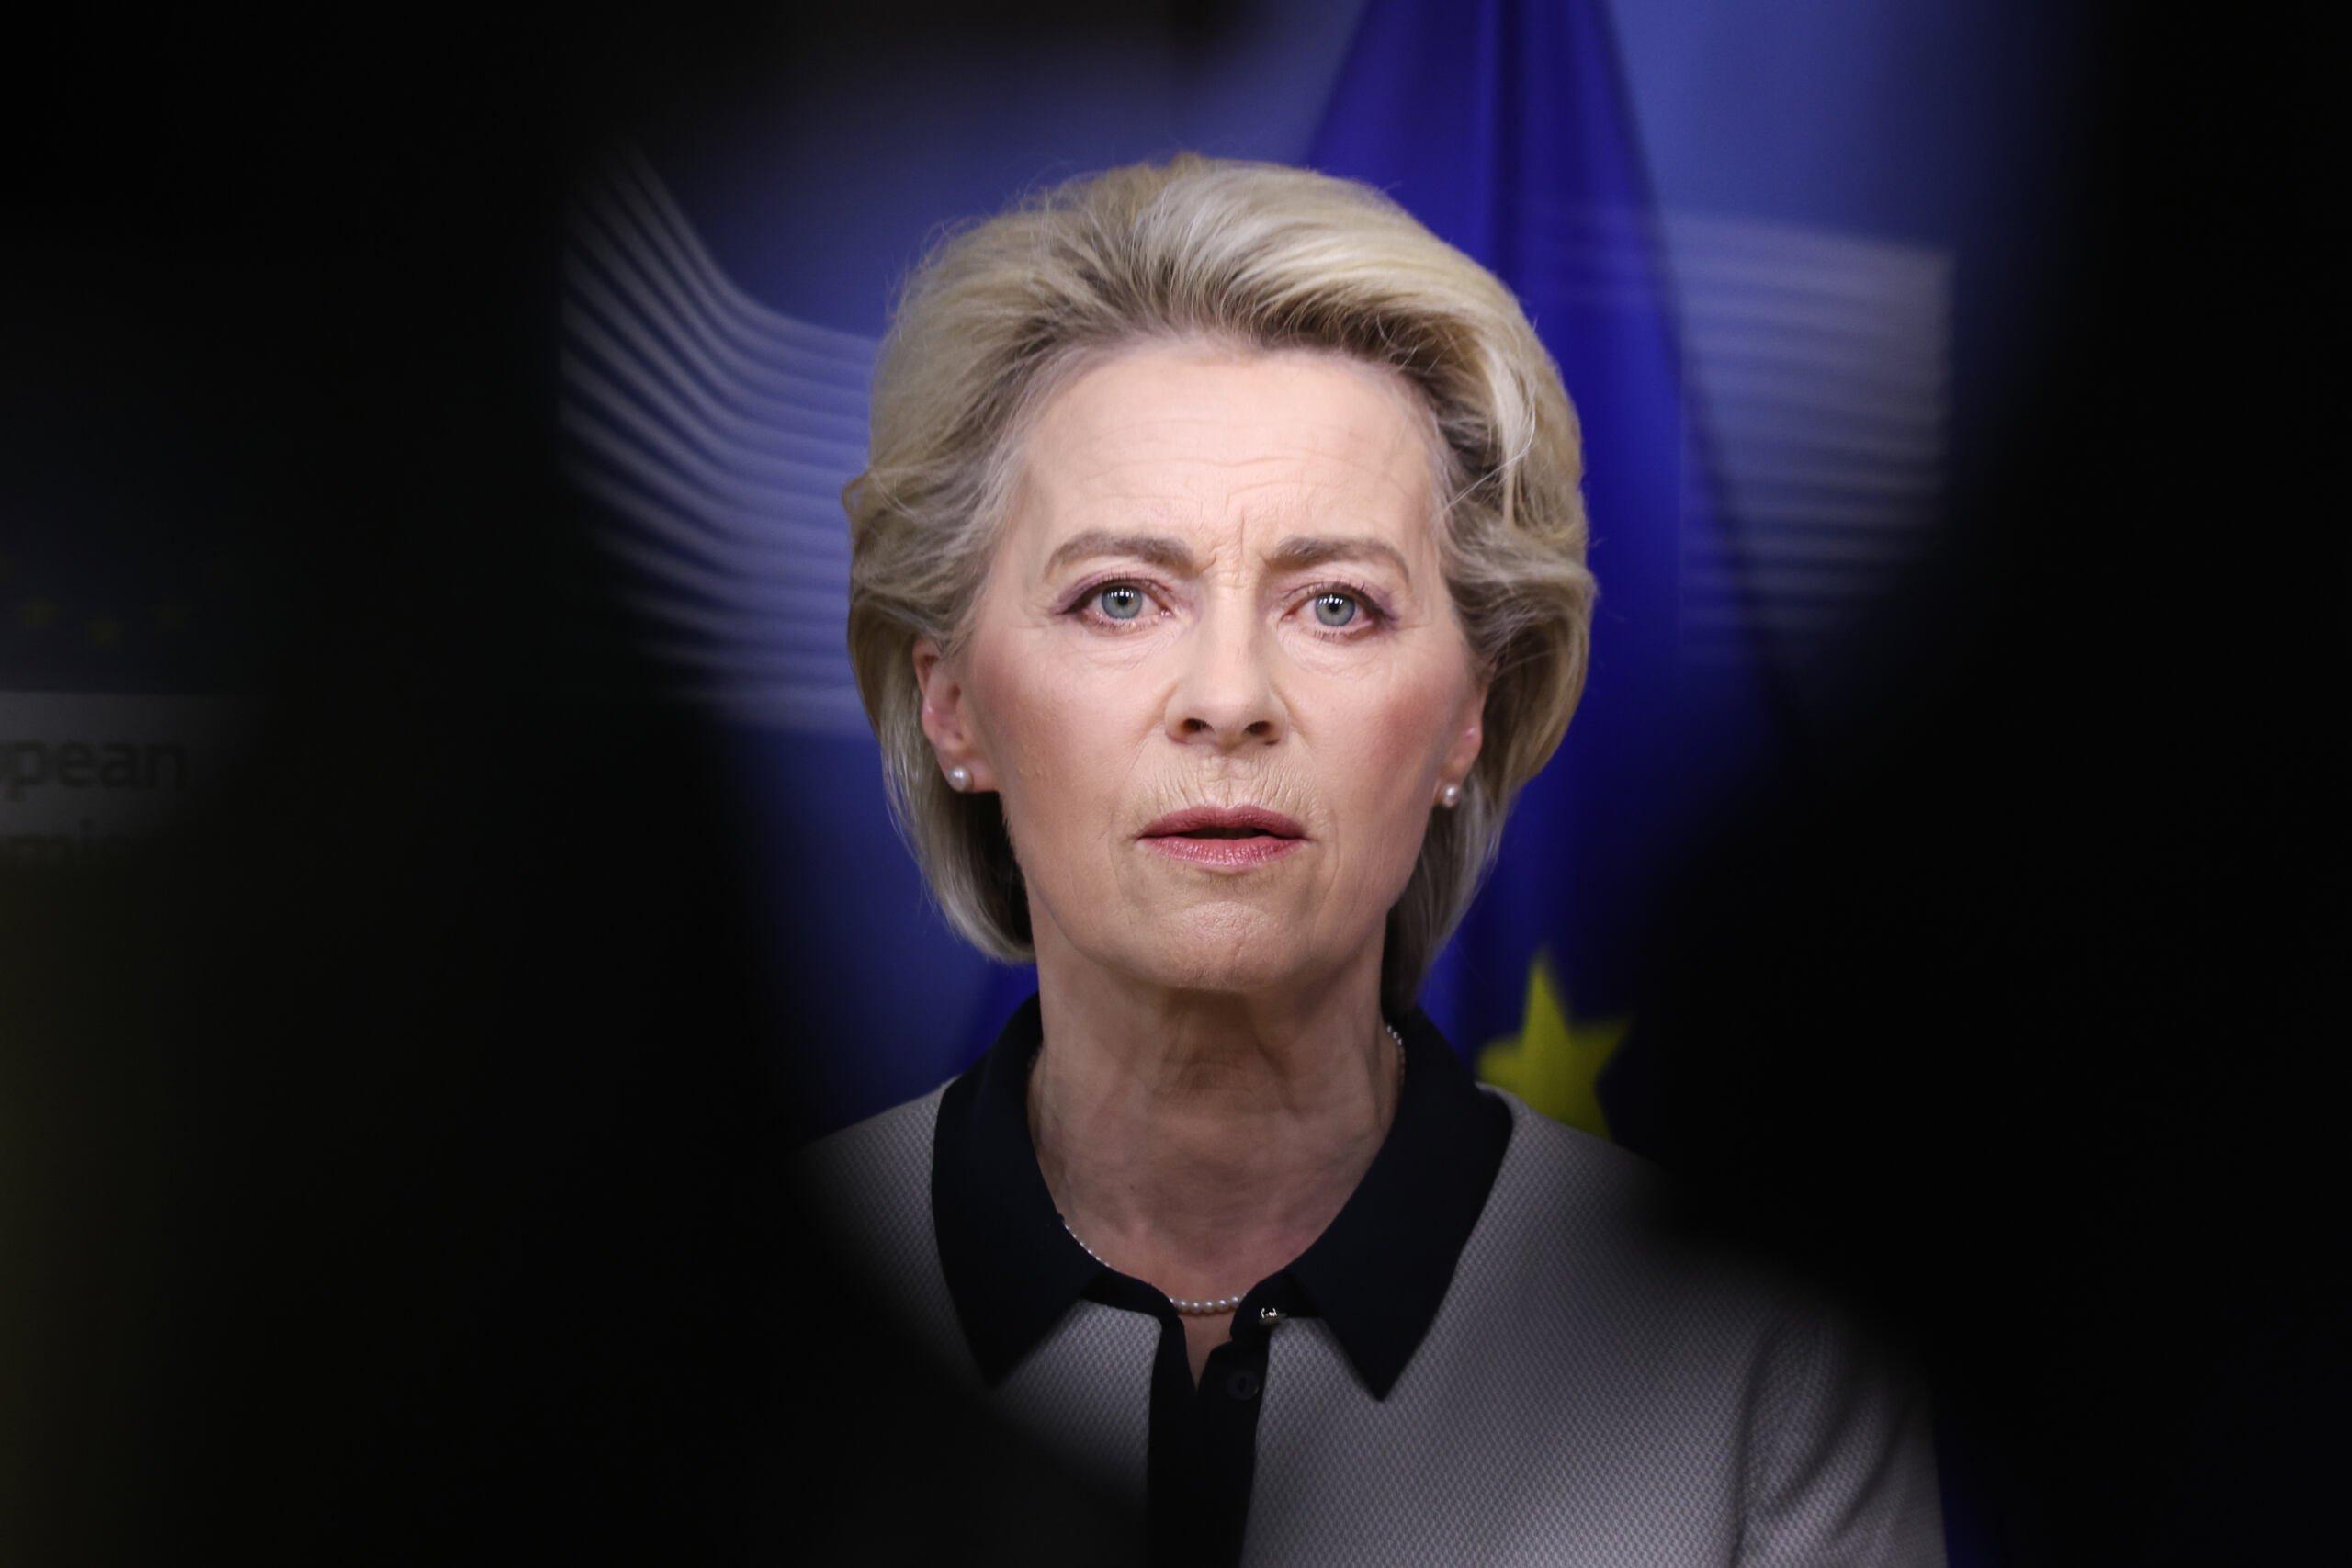 European Commission President Ursula von der Leyen speaks duuring a press statement on Russia's attack on Ukraine, in Brussels on February 24, 2022, ahead of a EU special summit called today to "discuss the crisis and further restrictive measures" that "will impose massive and severe consequences on Russia for its actions". - European Commission will outline to leaders the new sanctions, which will add to an initial round of sanctions imposed on Wednesday after President Vladimir Putin recognised rebel-held parts of Ukraine as independent. (Photo by Kenzo TRIBOUILLARD / POOL / AFP)